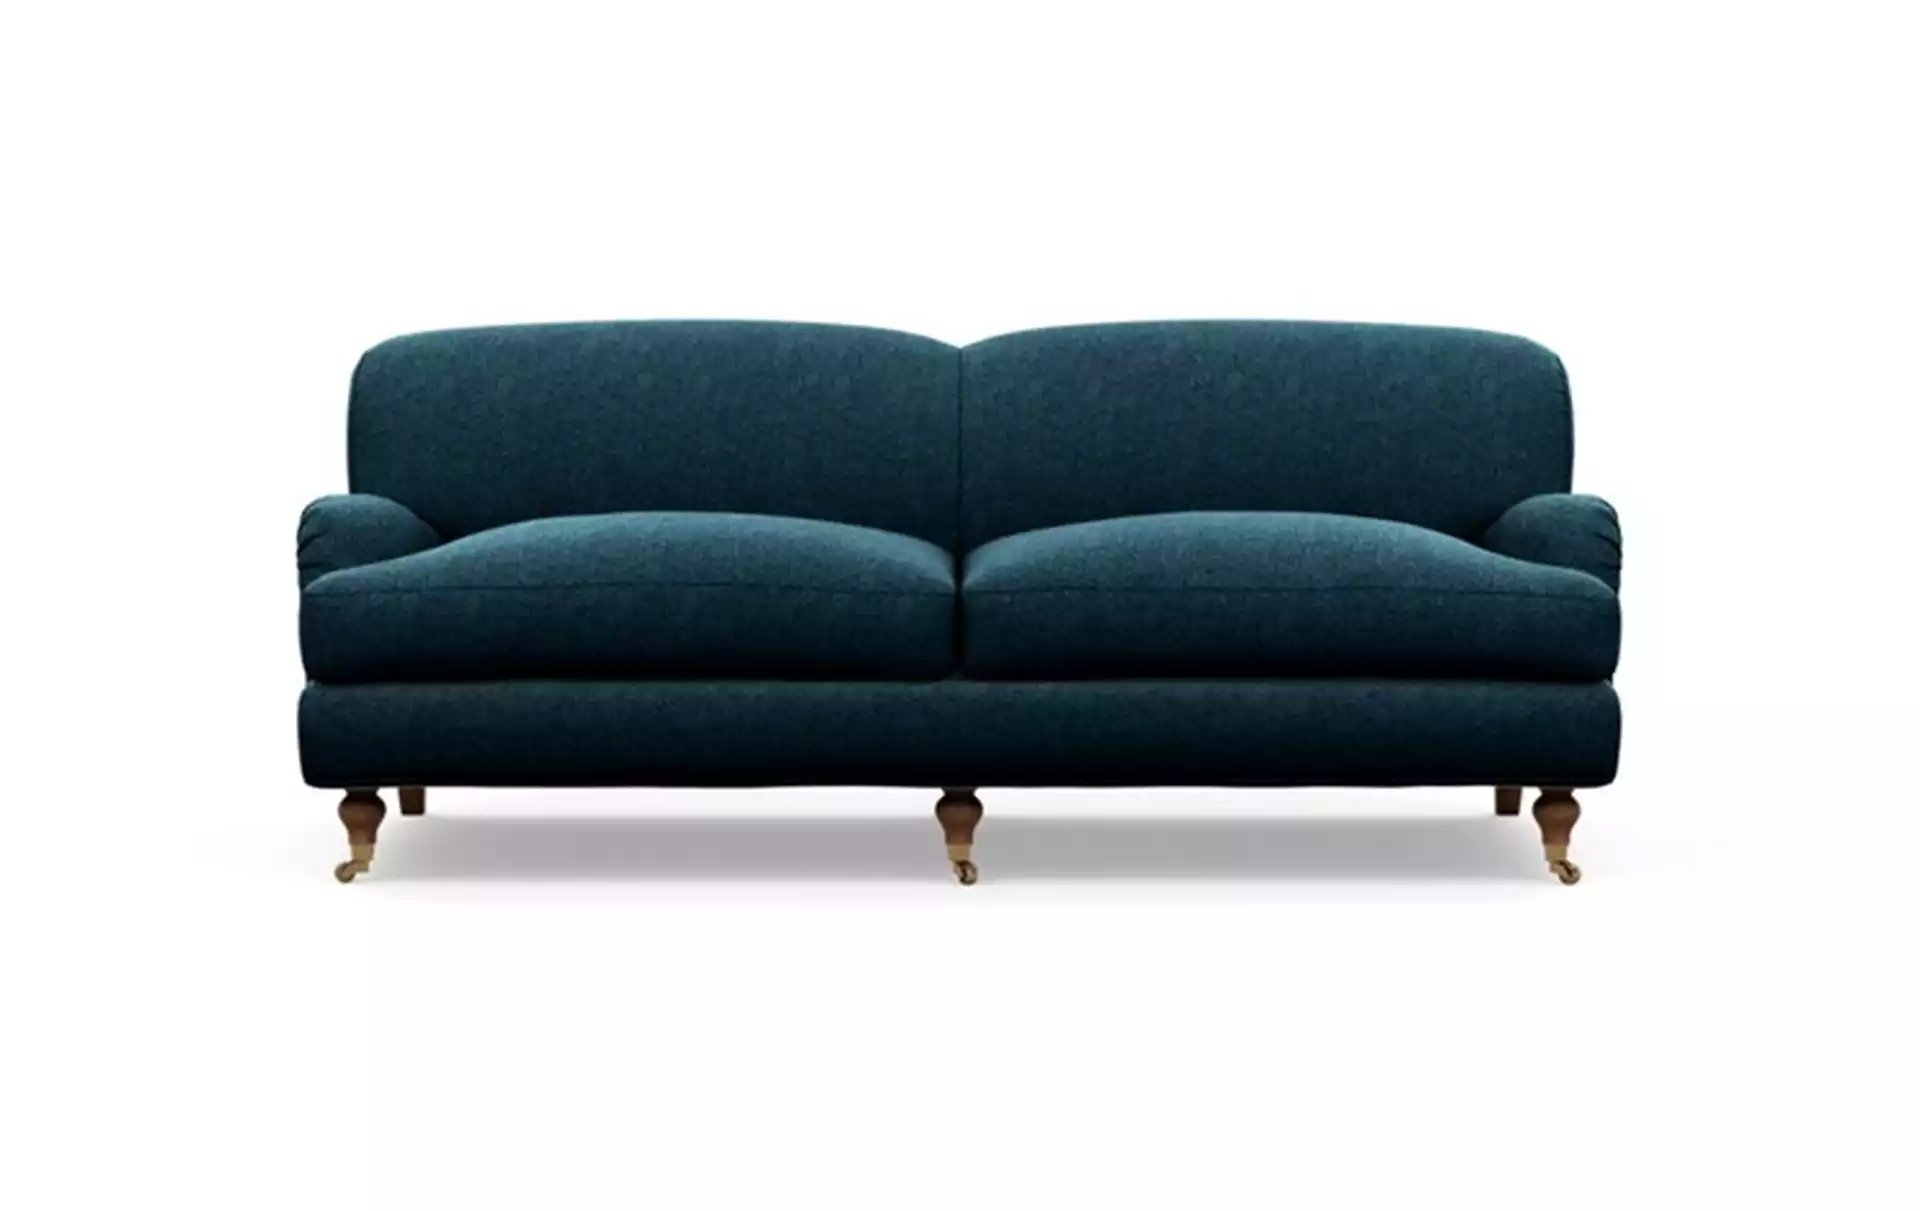 Rose by The Everygirl Sofa with Blue Indigo Fabric and Oiled Walnut with Brass Caster legs